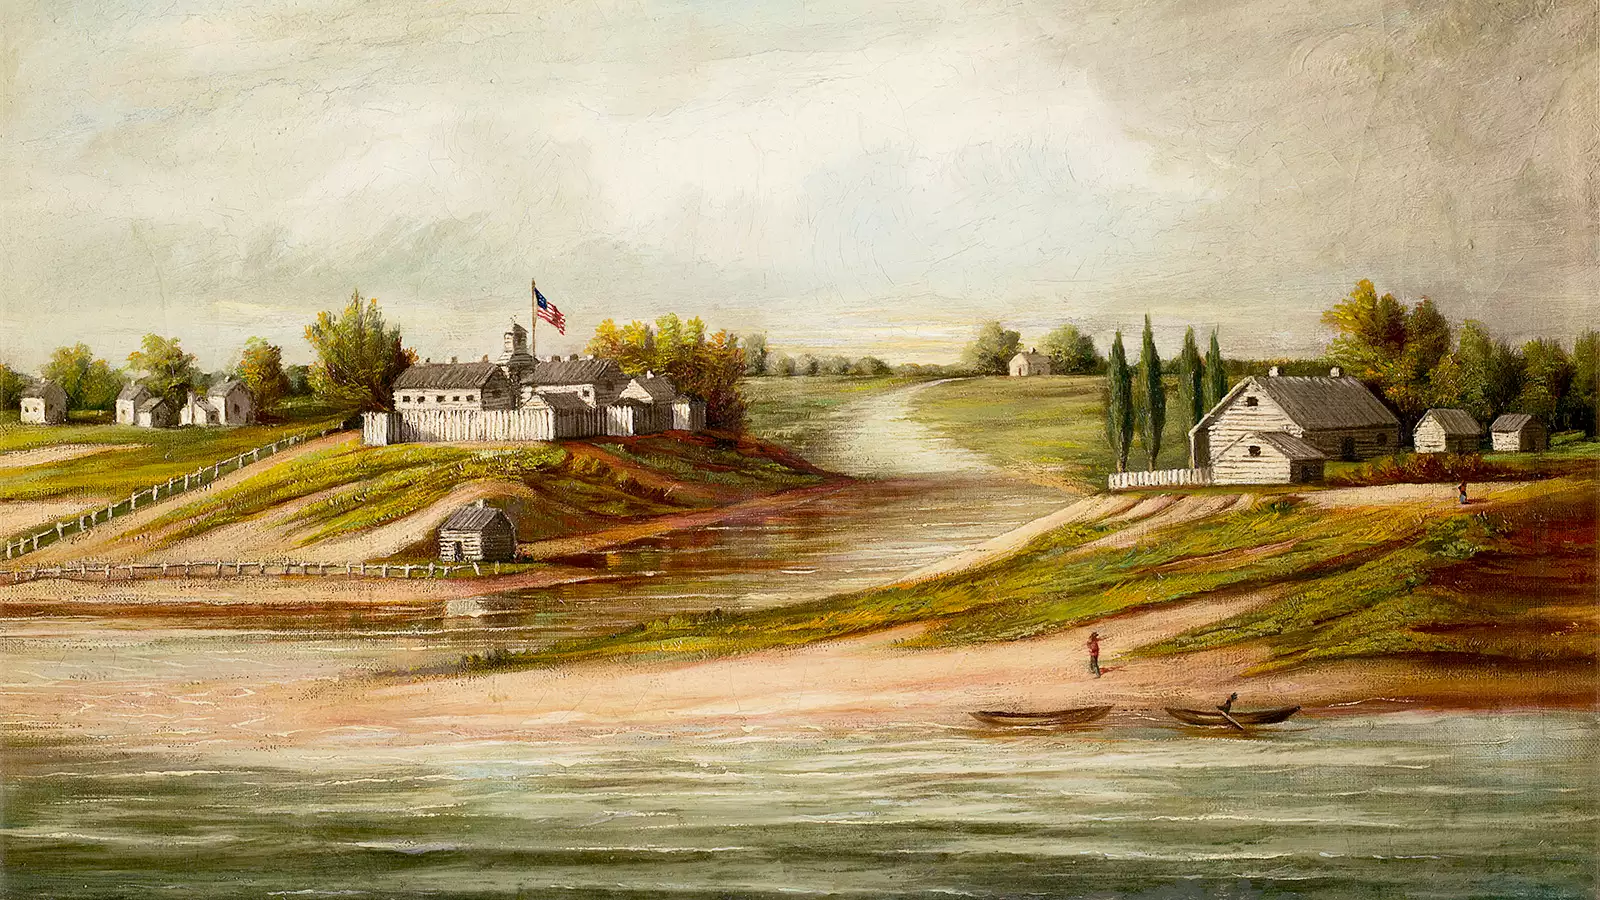 The Kinzie Mansion, which John Kinzie purchased from Jean Baptiste Point DuSable, and Fort Dearborn, painted circa 1900 by an unidentified artist. Oil on canvas